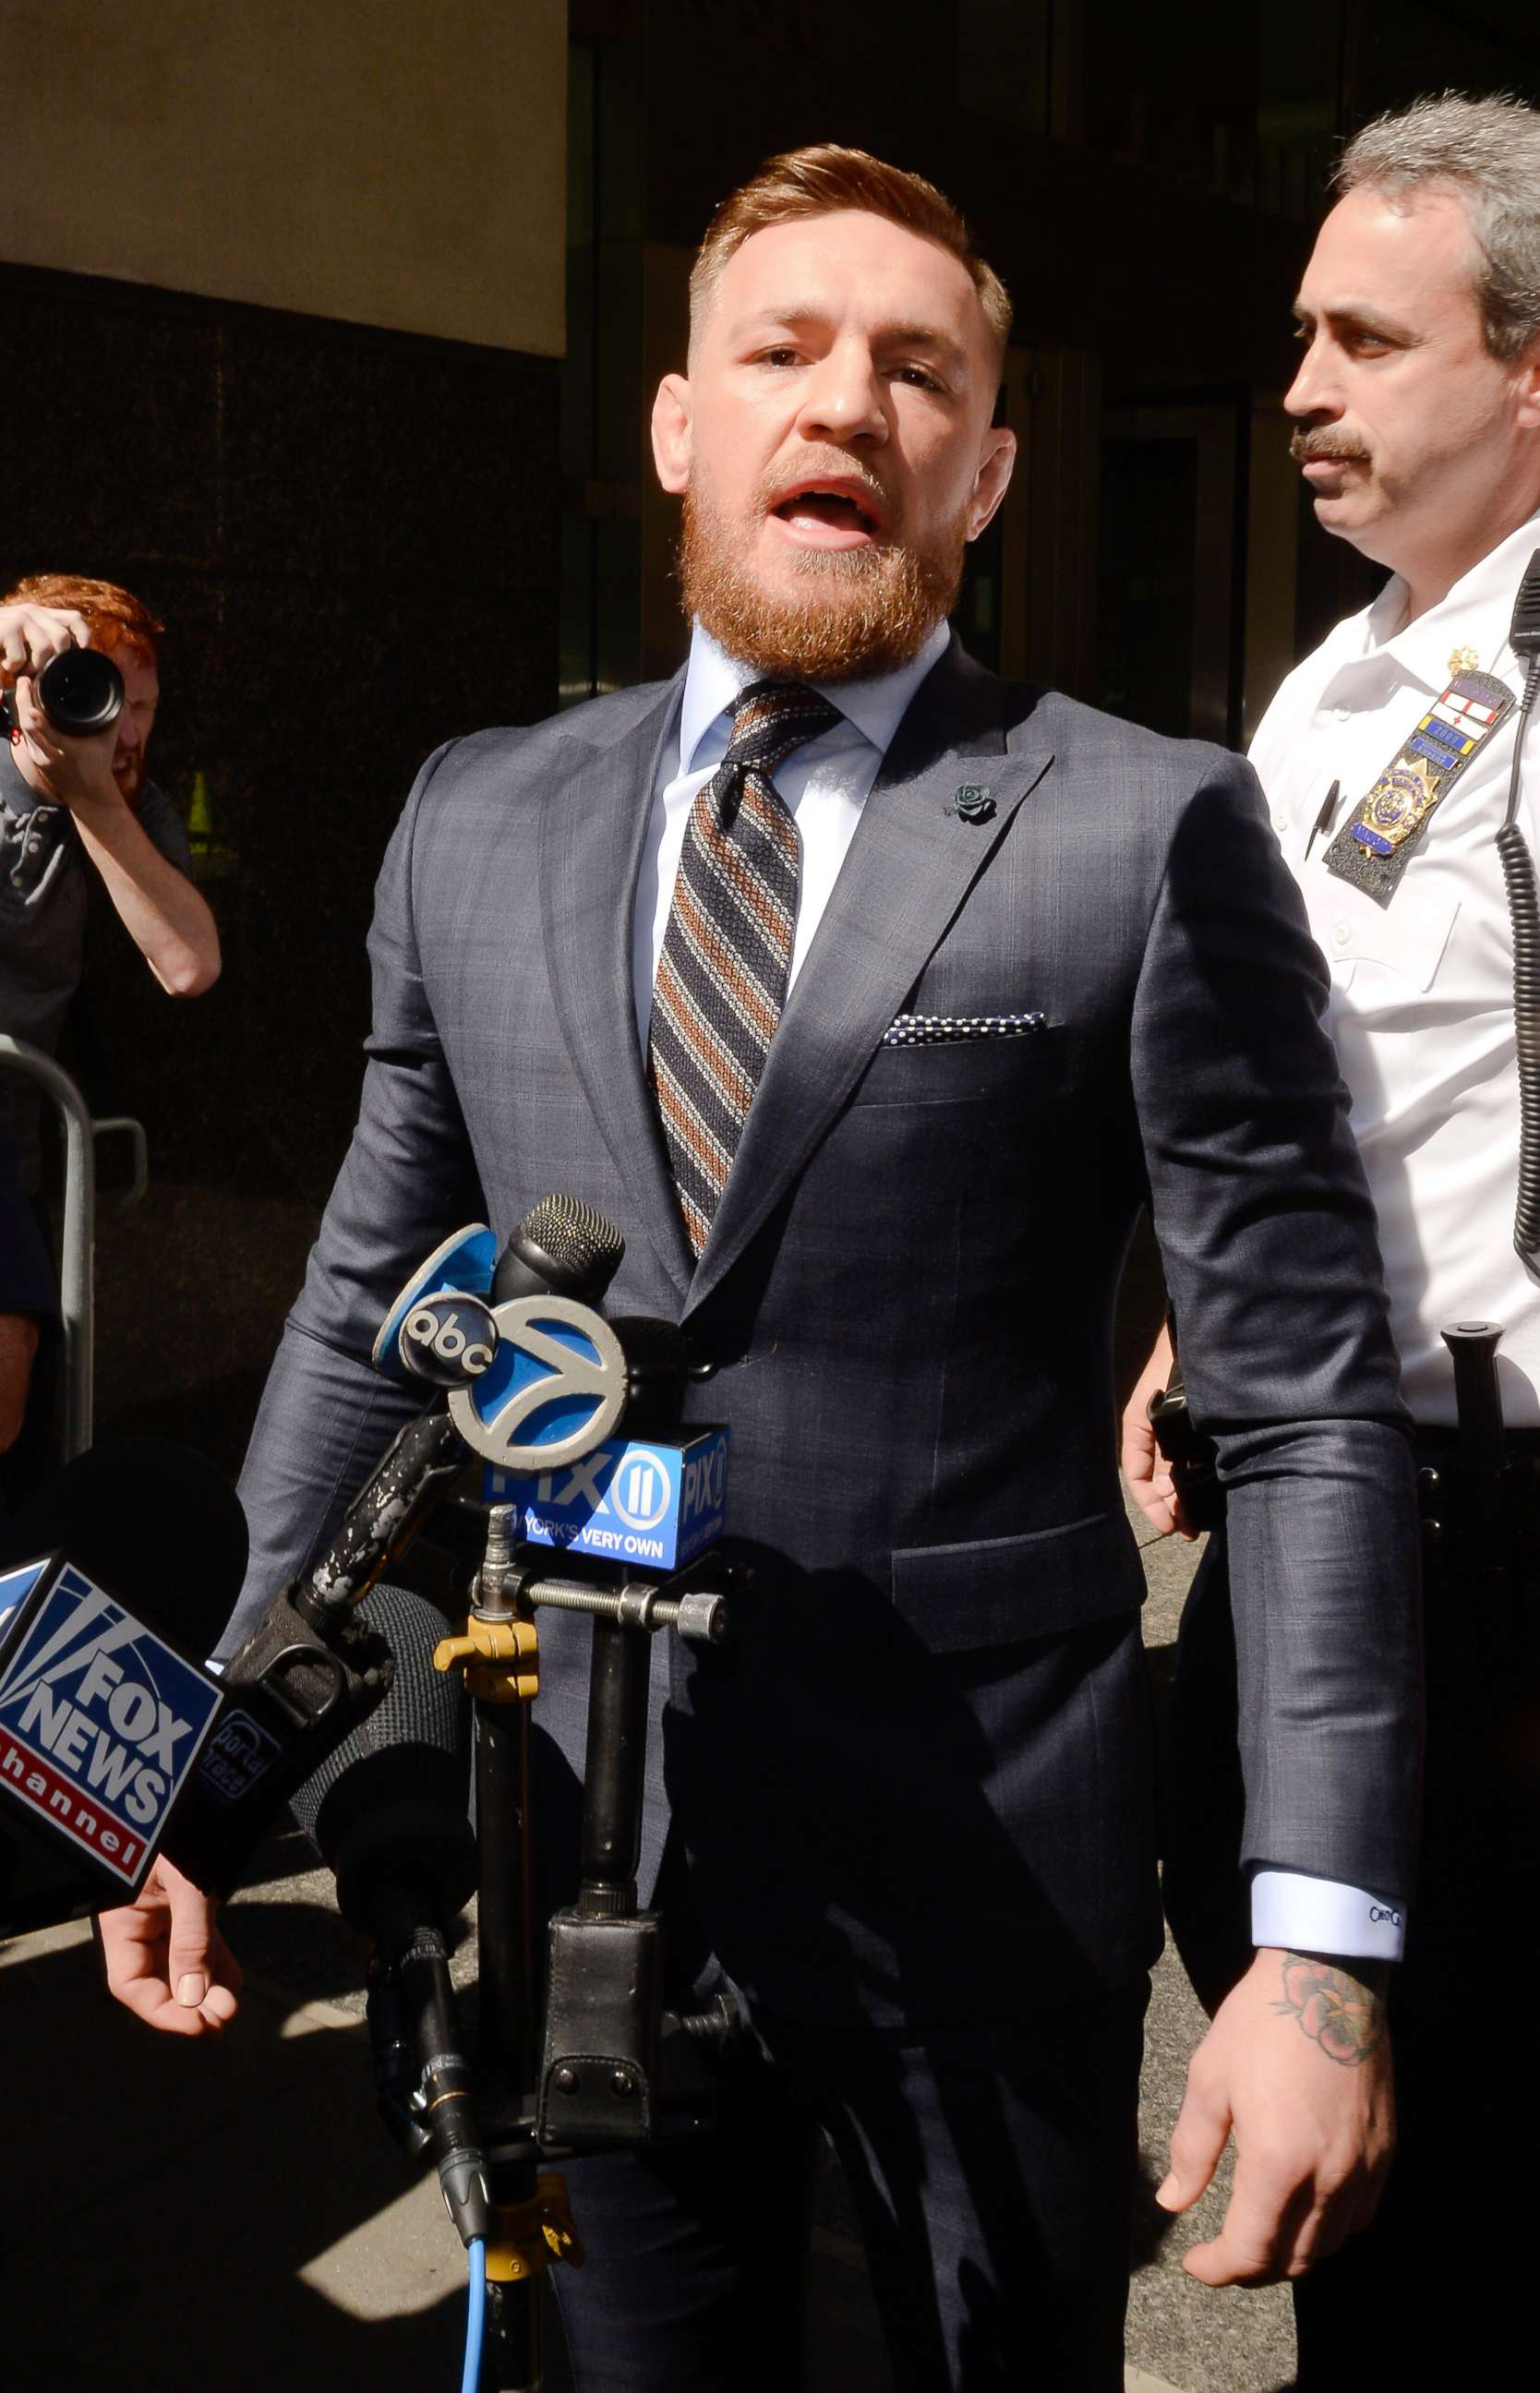 PHOTO: Conor McGregor appears at Brooklyn Criminal Court, June 14, 2018, in New York City.